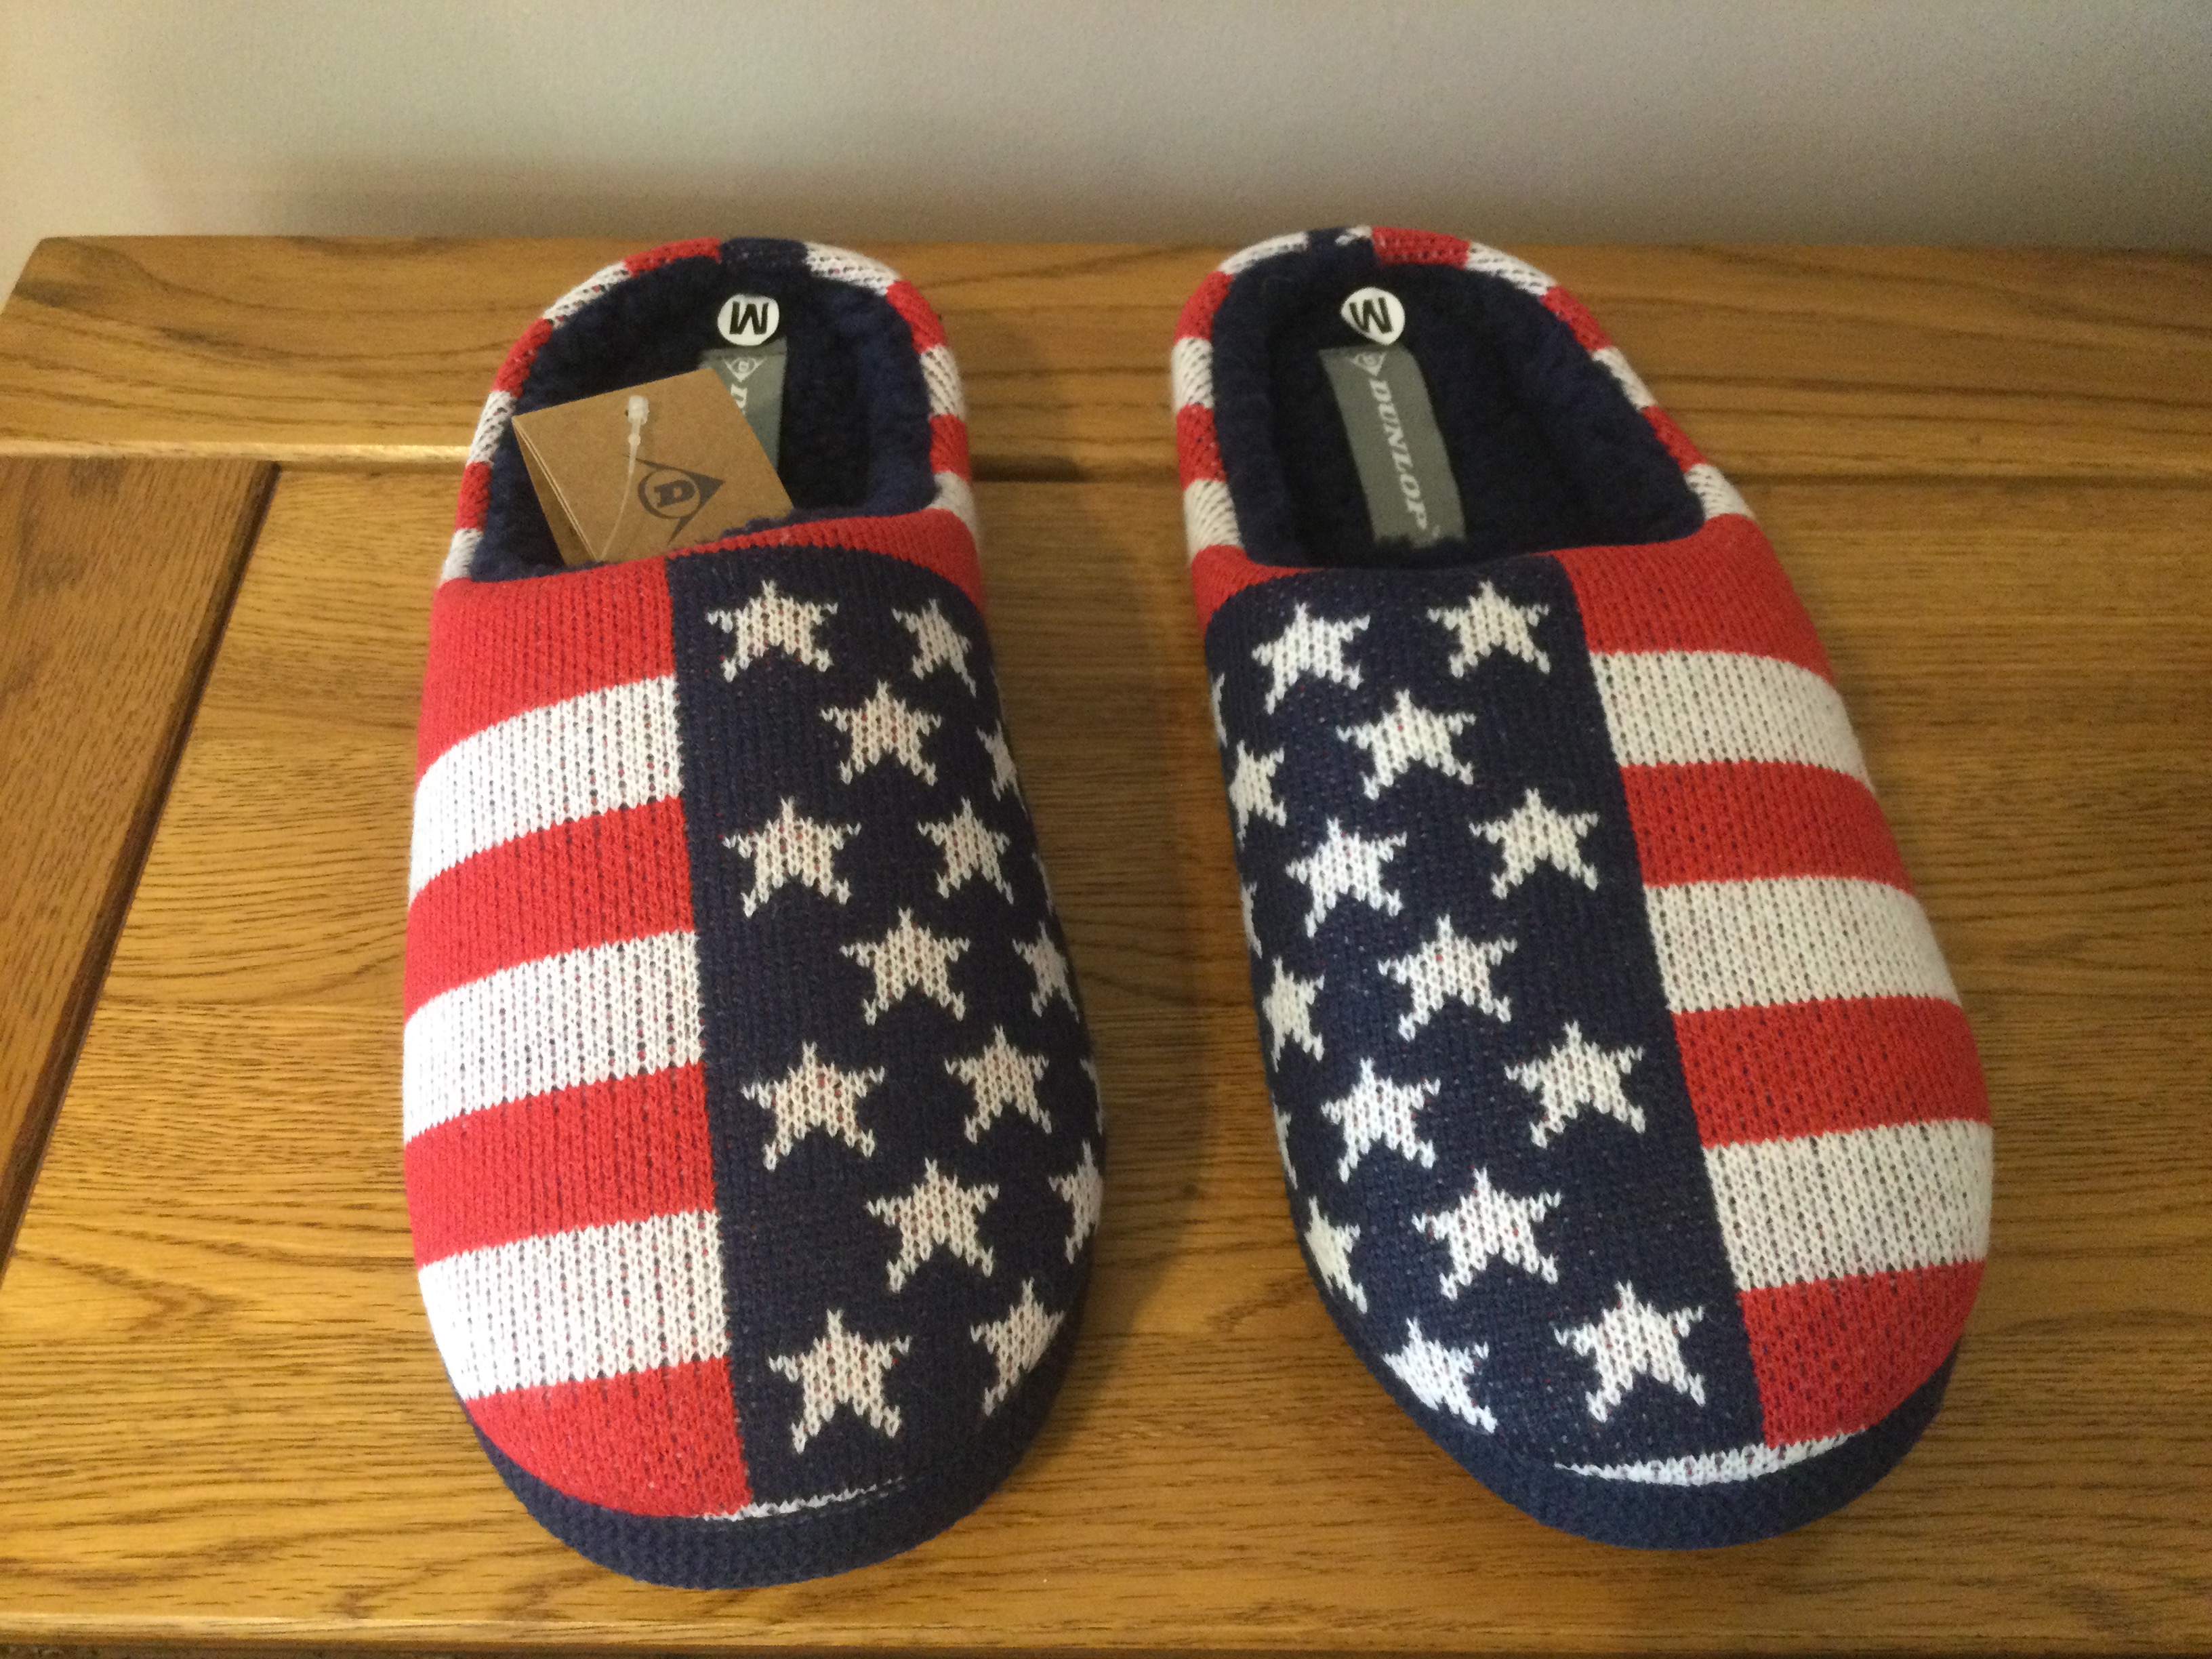 Men's Dunlop, “USA Stars and Stripes” Memory Foam, Mule Slippers, Size M (8/9) - New - Image 2 of 5